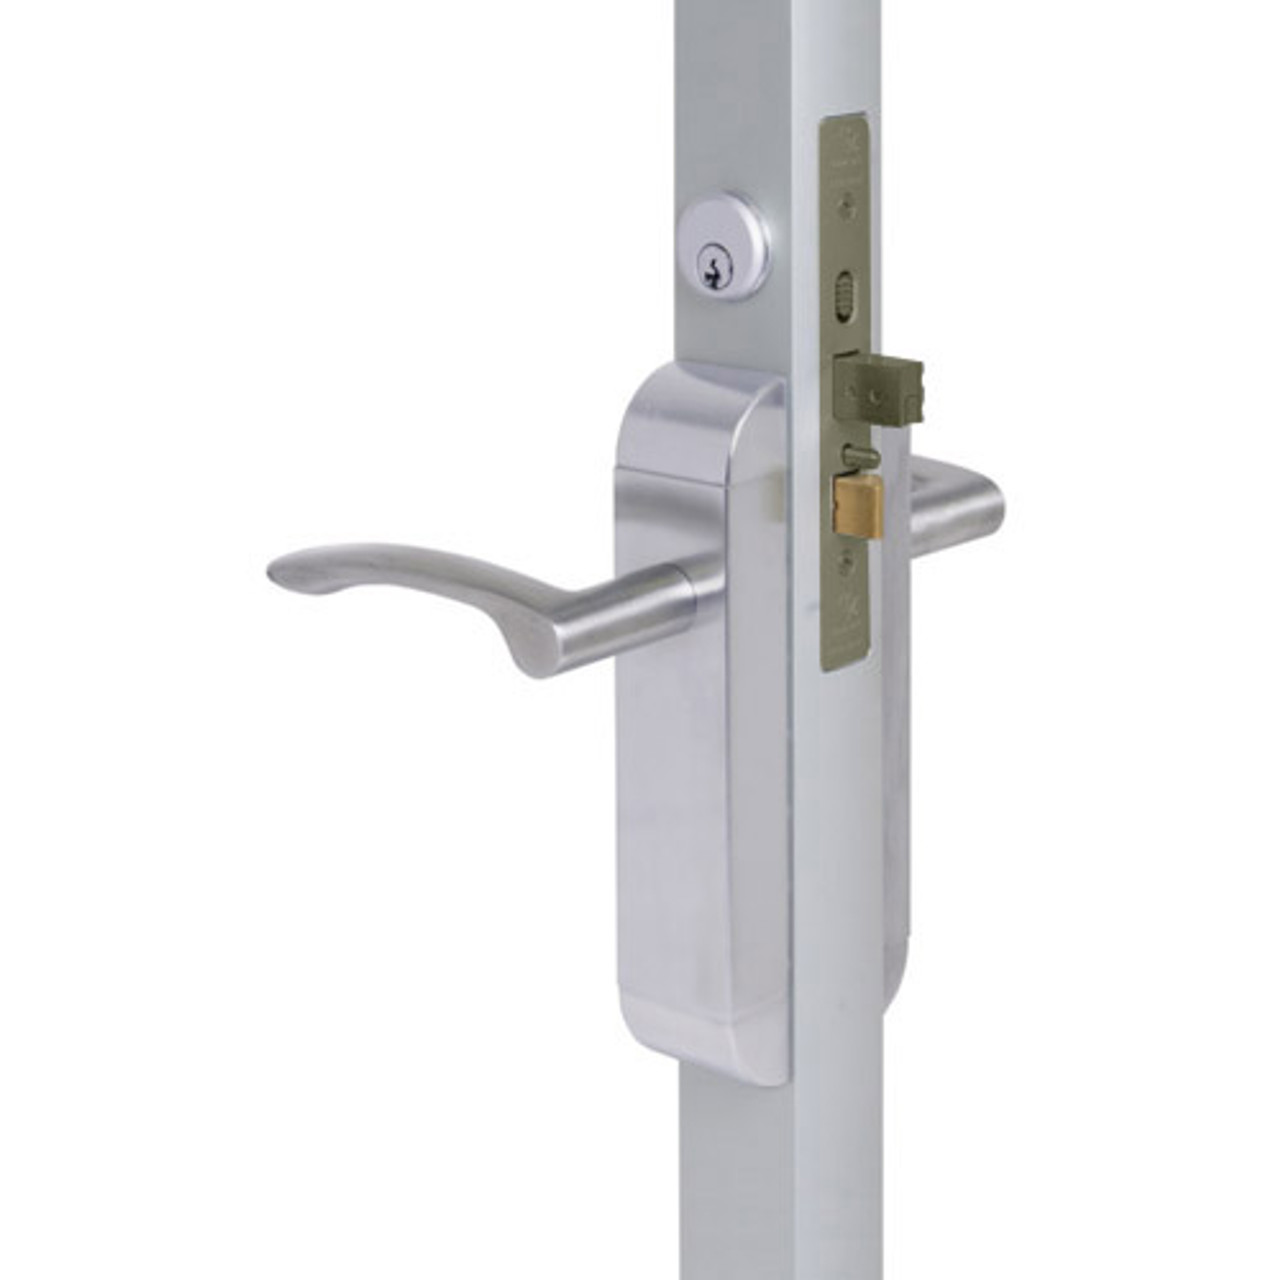 2190-312-303-32 Adams Rite Dual Force Interconnected 2190 series Deadlock/Deadlatch in Bright Stainless